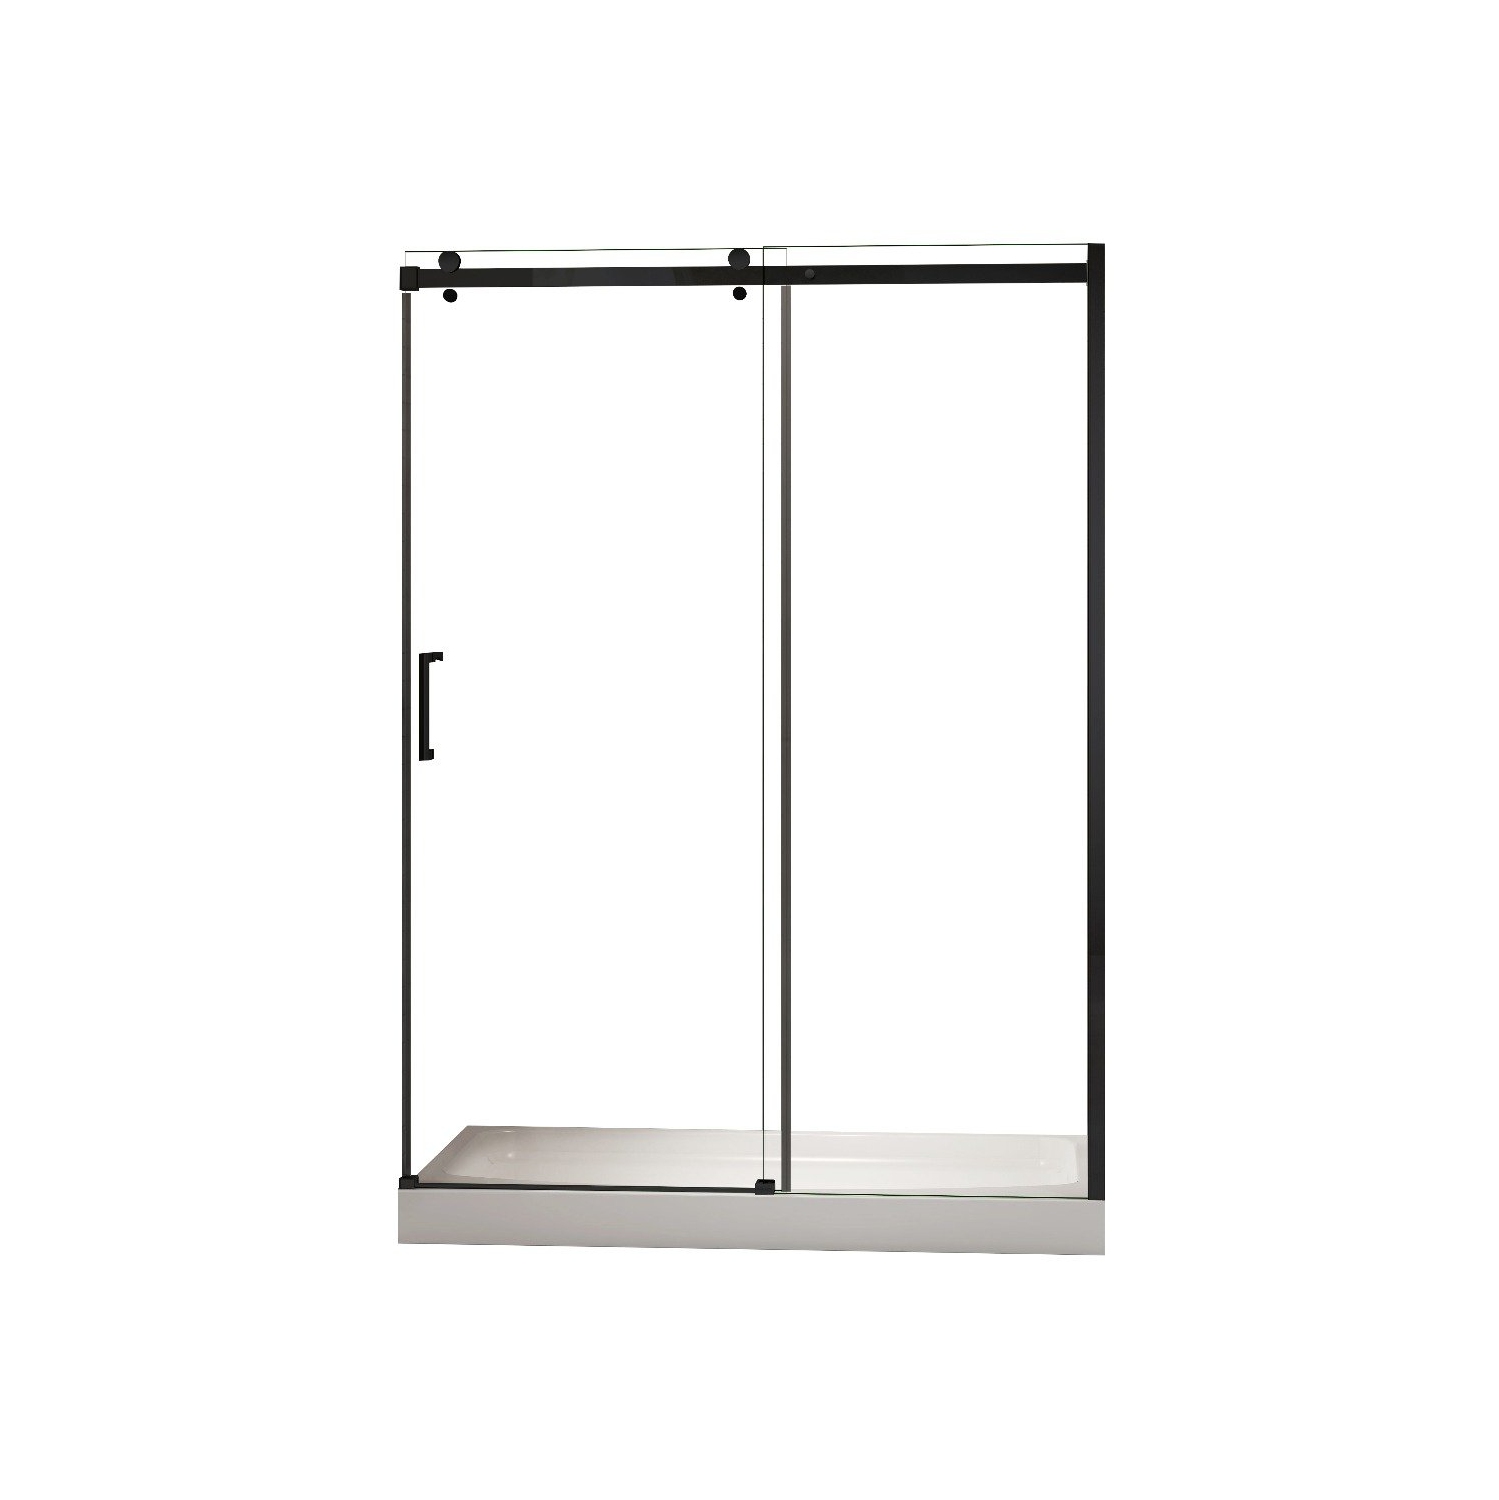 Agua Canada - CLD-48BK - Reversible Shower Door 8mm Tempered Glass